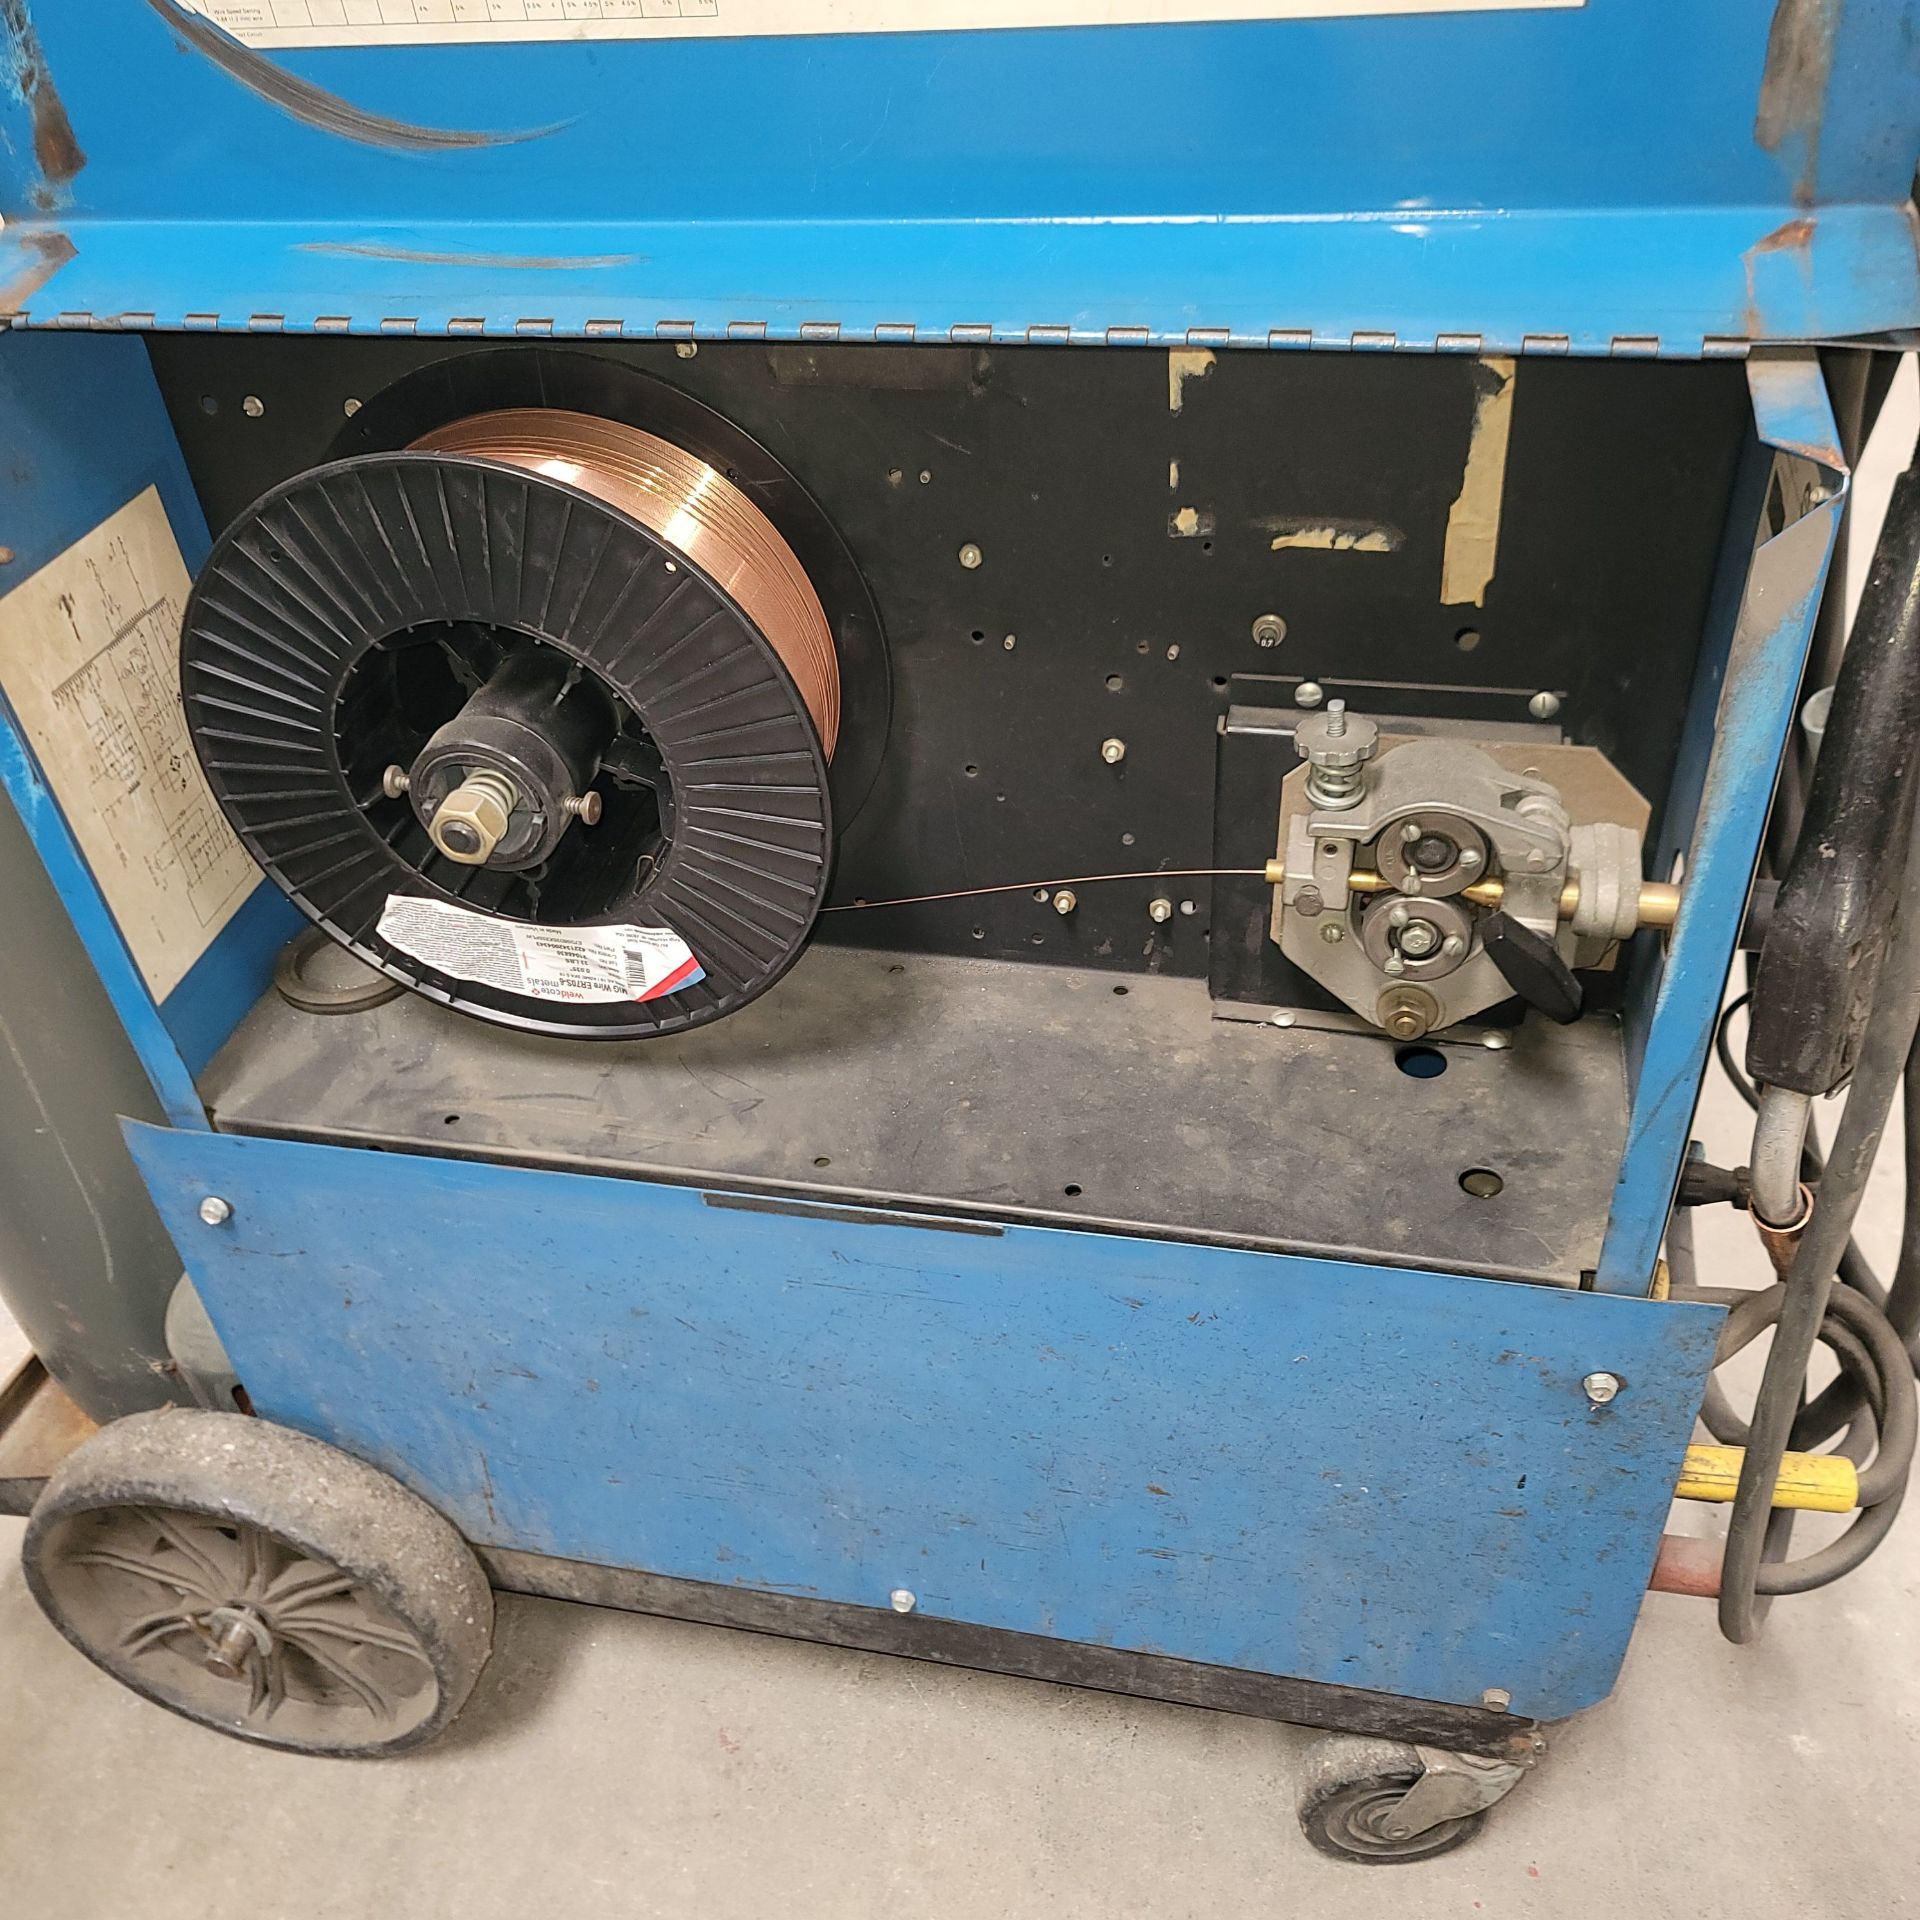 MILLERMATIC 200 WELDING POWER SOURCE, STOCK NO. 048291, S/N JH298273, GAS CYLINDER NOT INCLUDED - Image 2 of 3